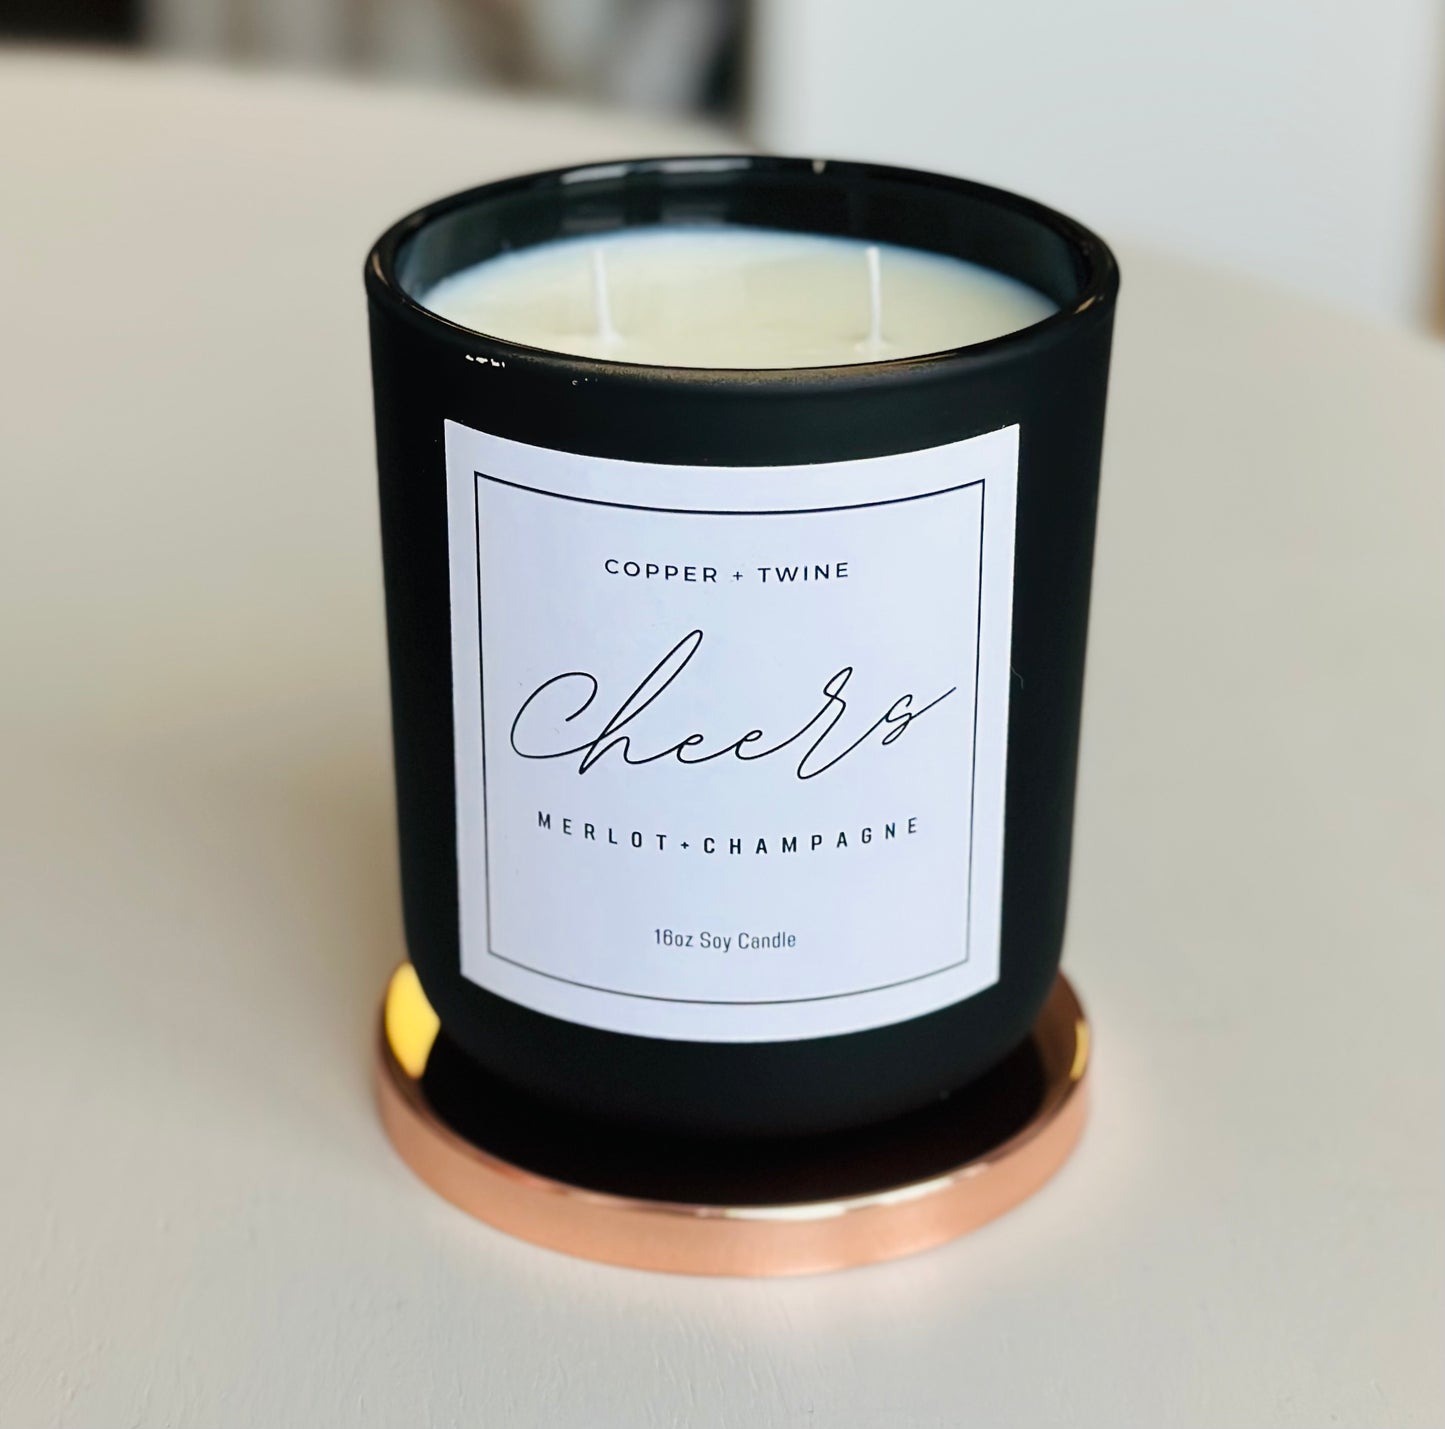 "Cheers" Candle